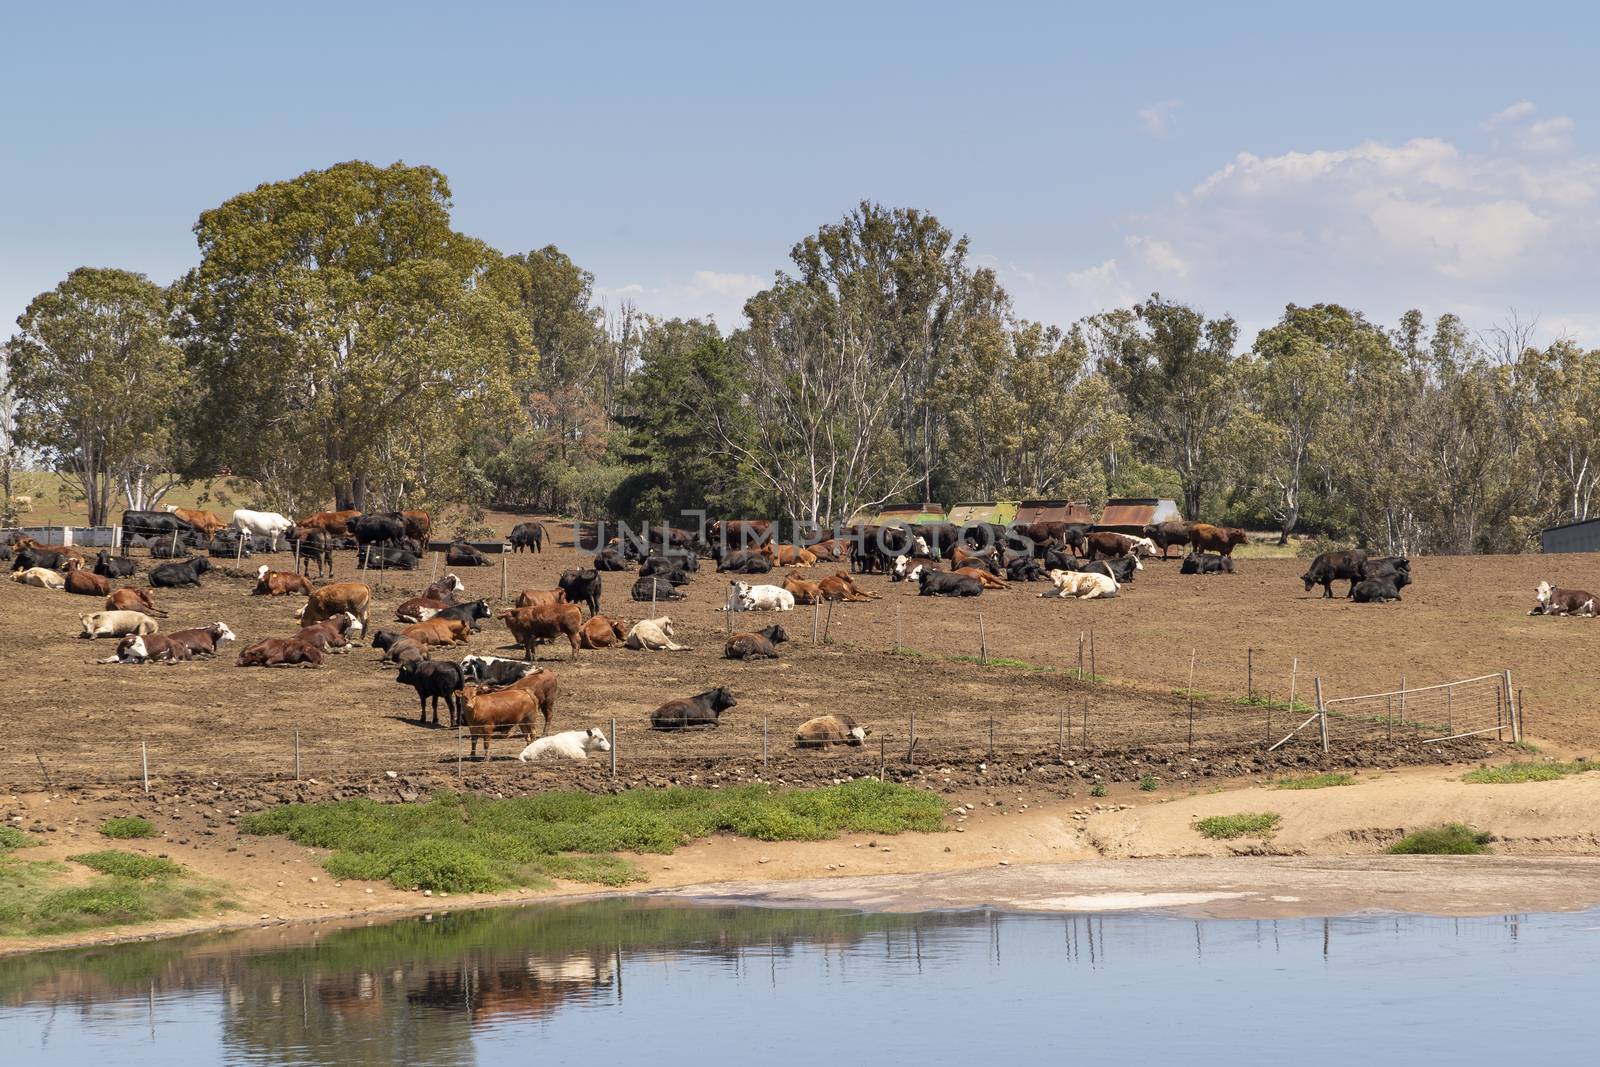 A herd of dairy cows resting on brown dirt near the milking shed in front of a creek on a hill.